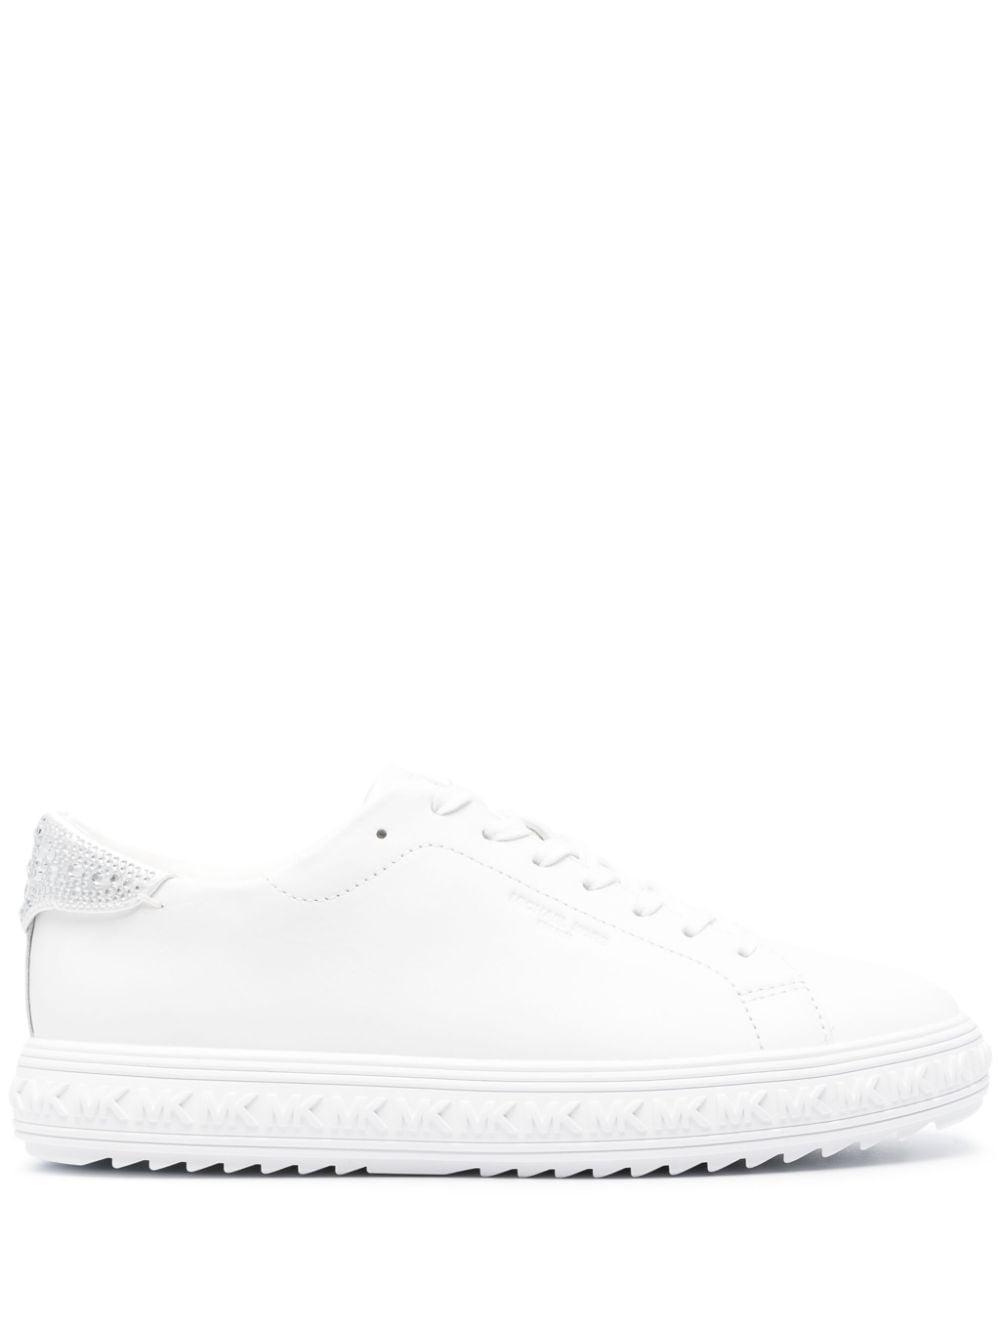 Michael Kors Collection Grove Lake crystal-embellished sneakers - White von Michael Kors Collection